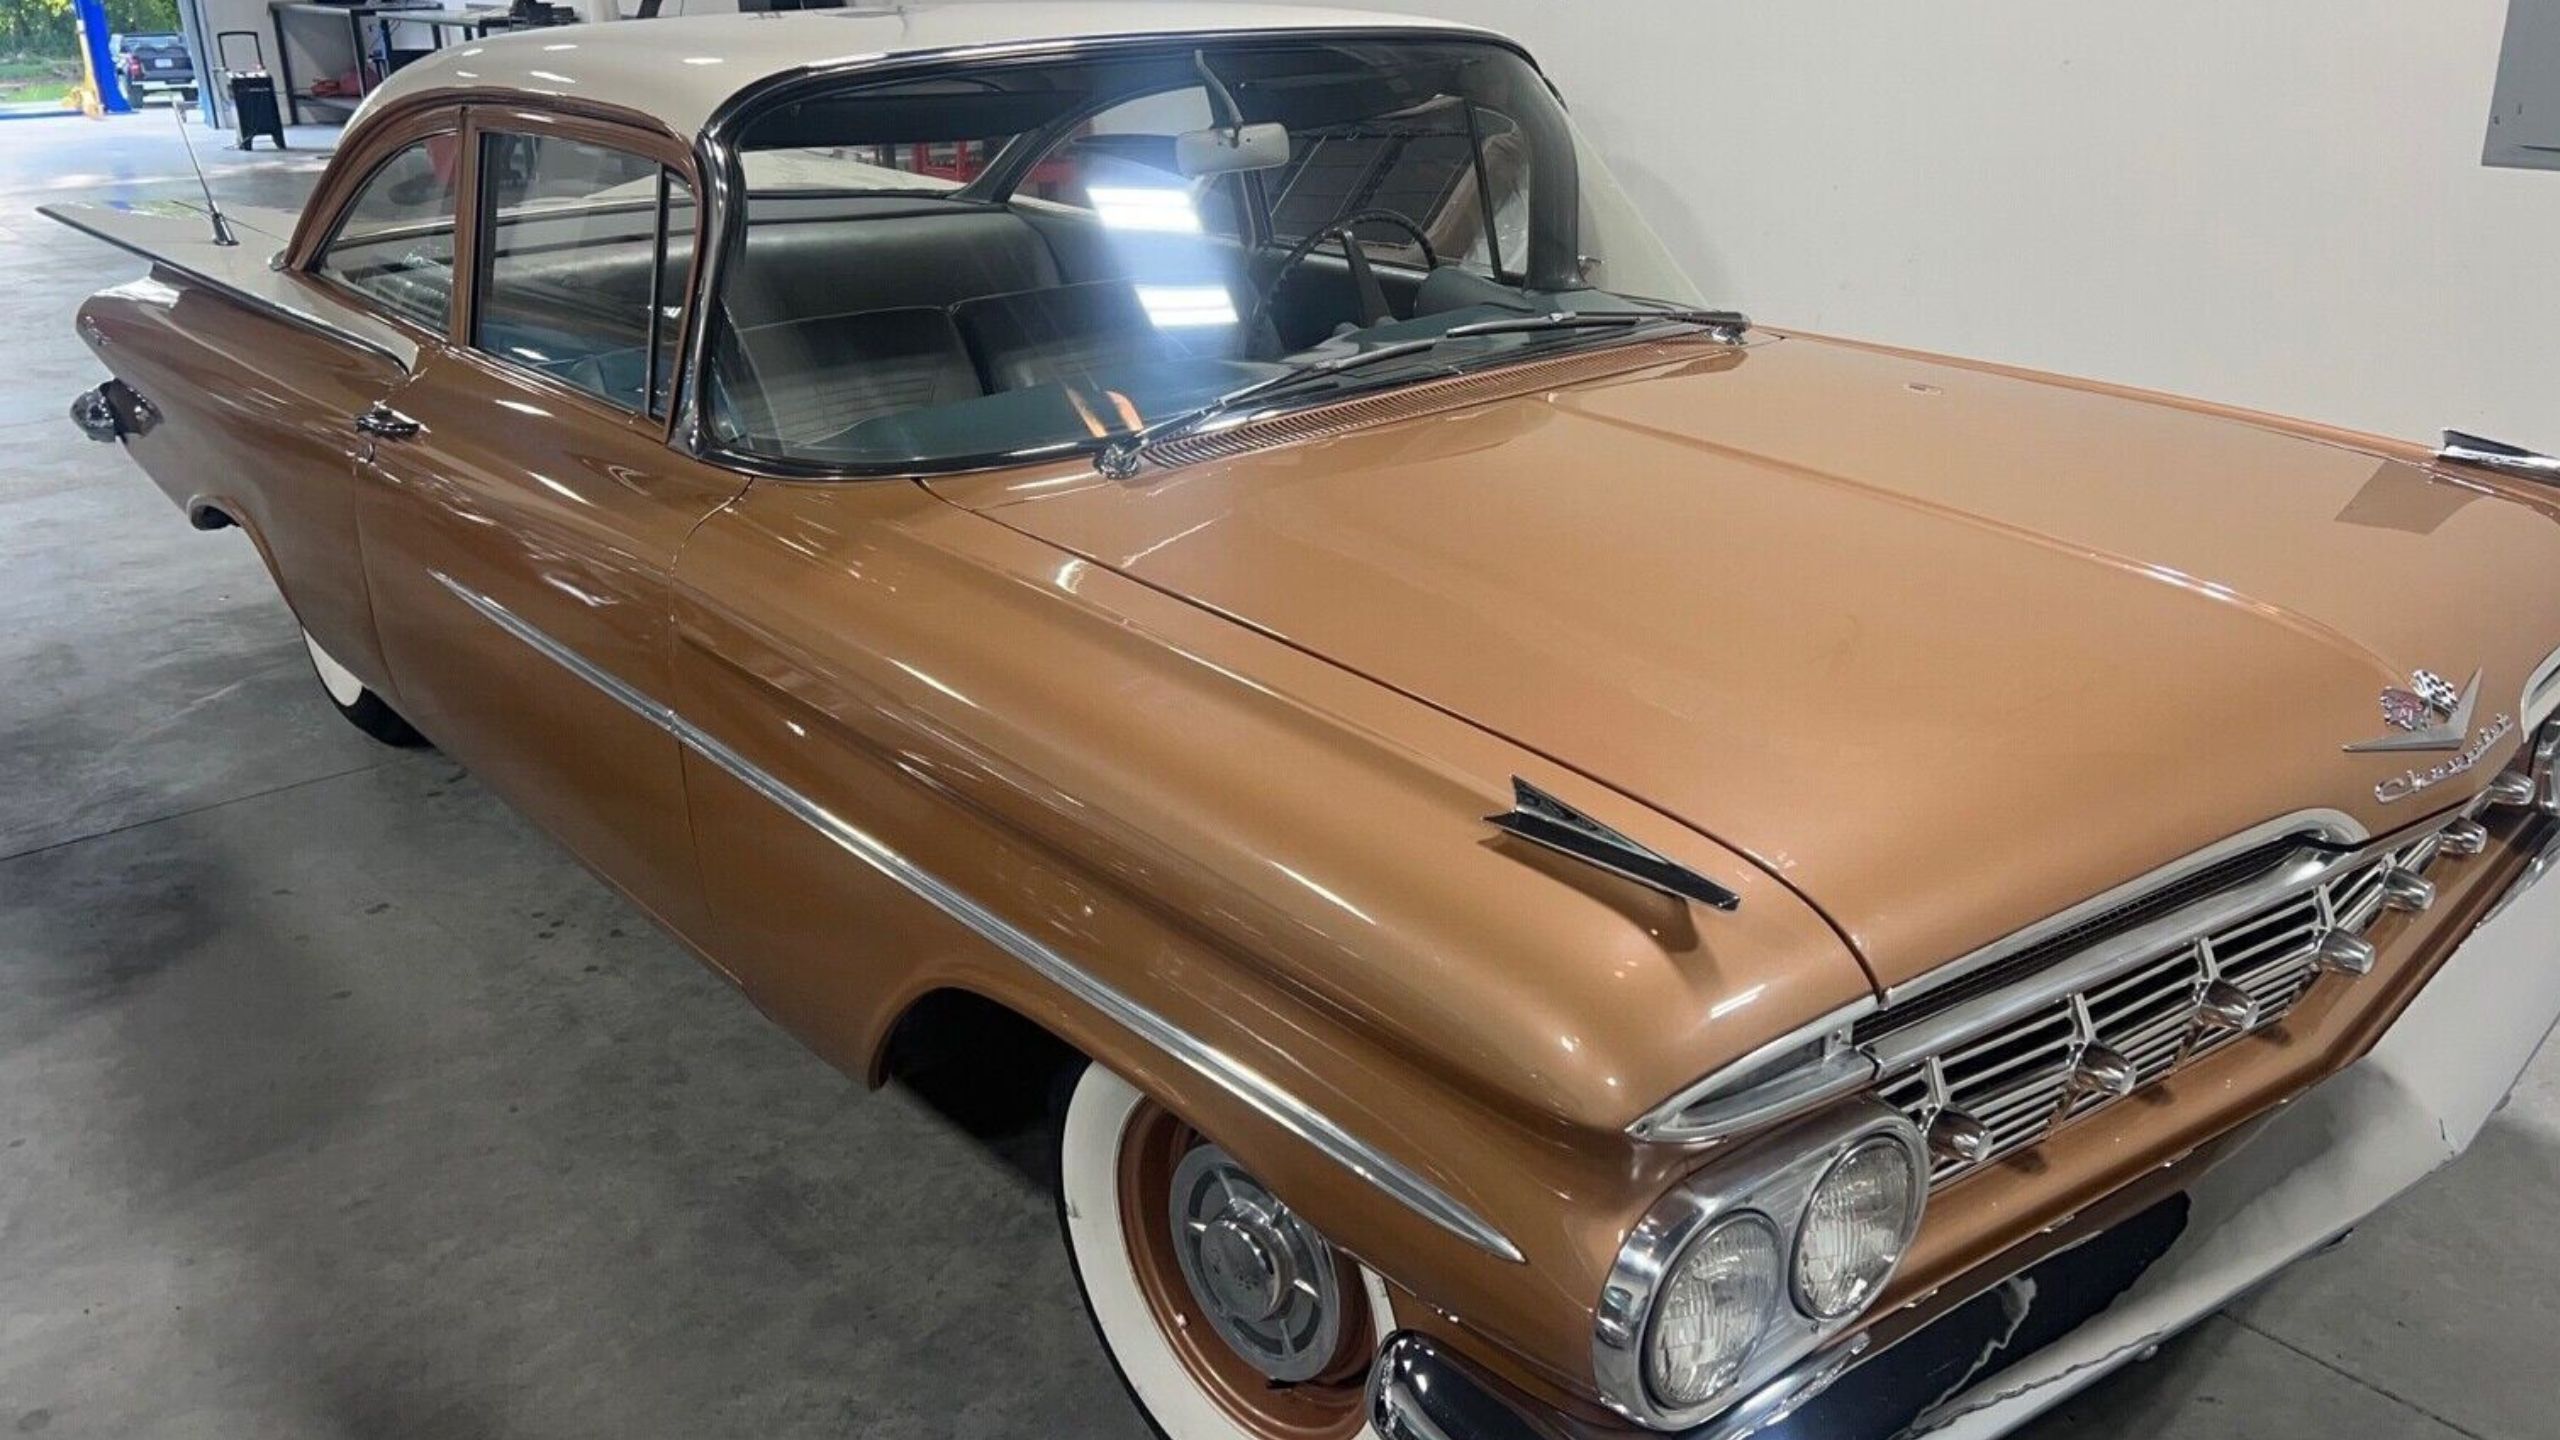 1959 Chevrolet Biscayne: Impeccable Condition & Engine Upgrade